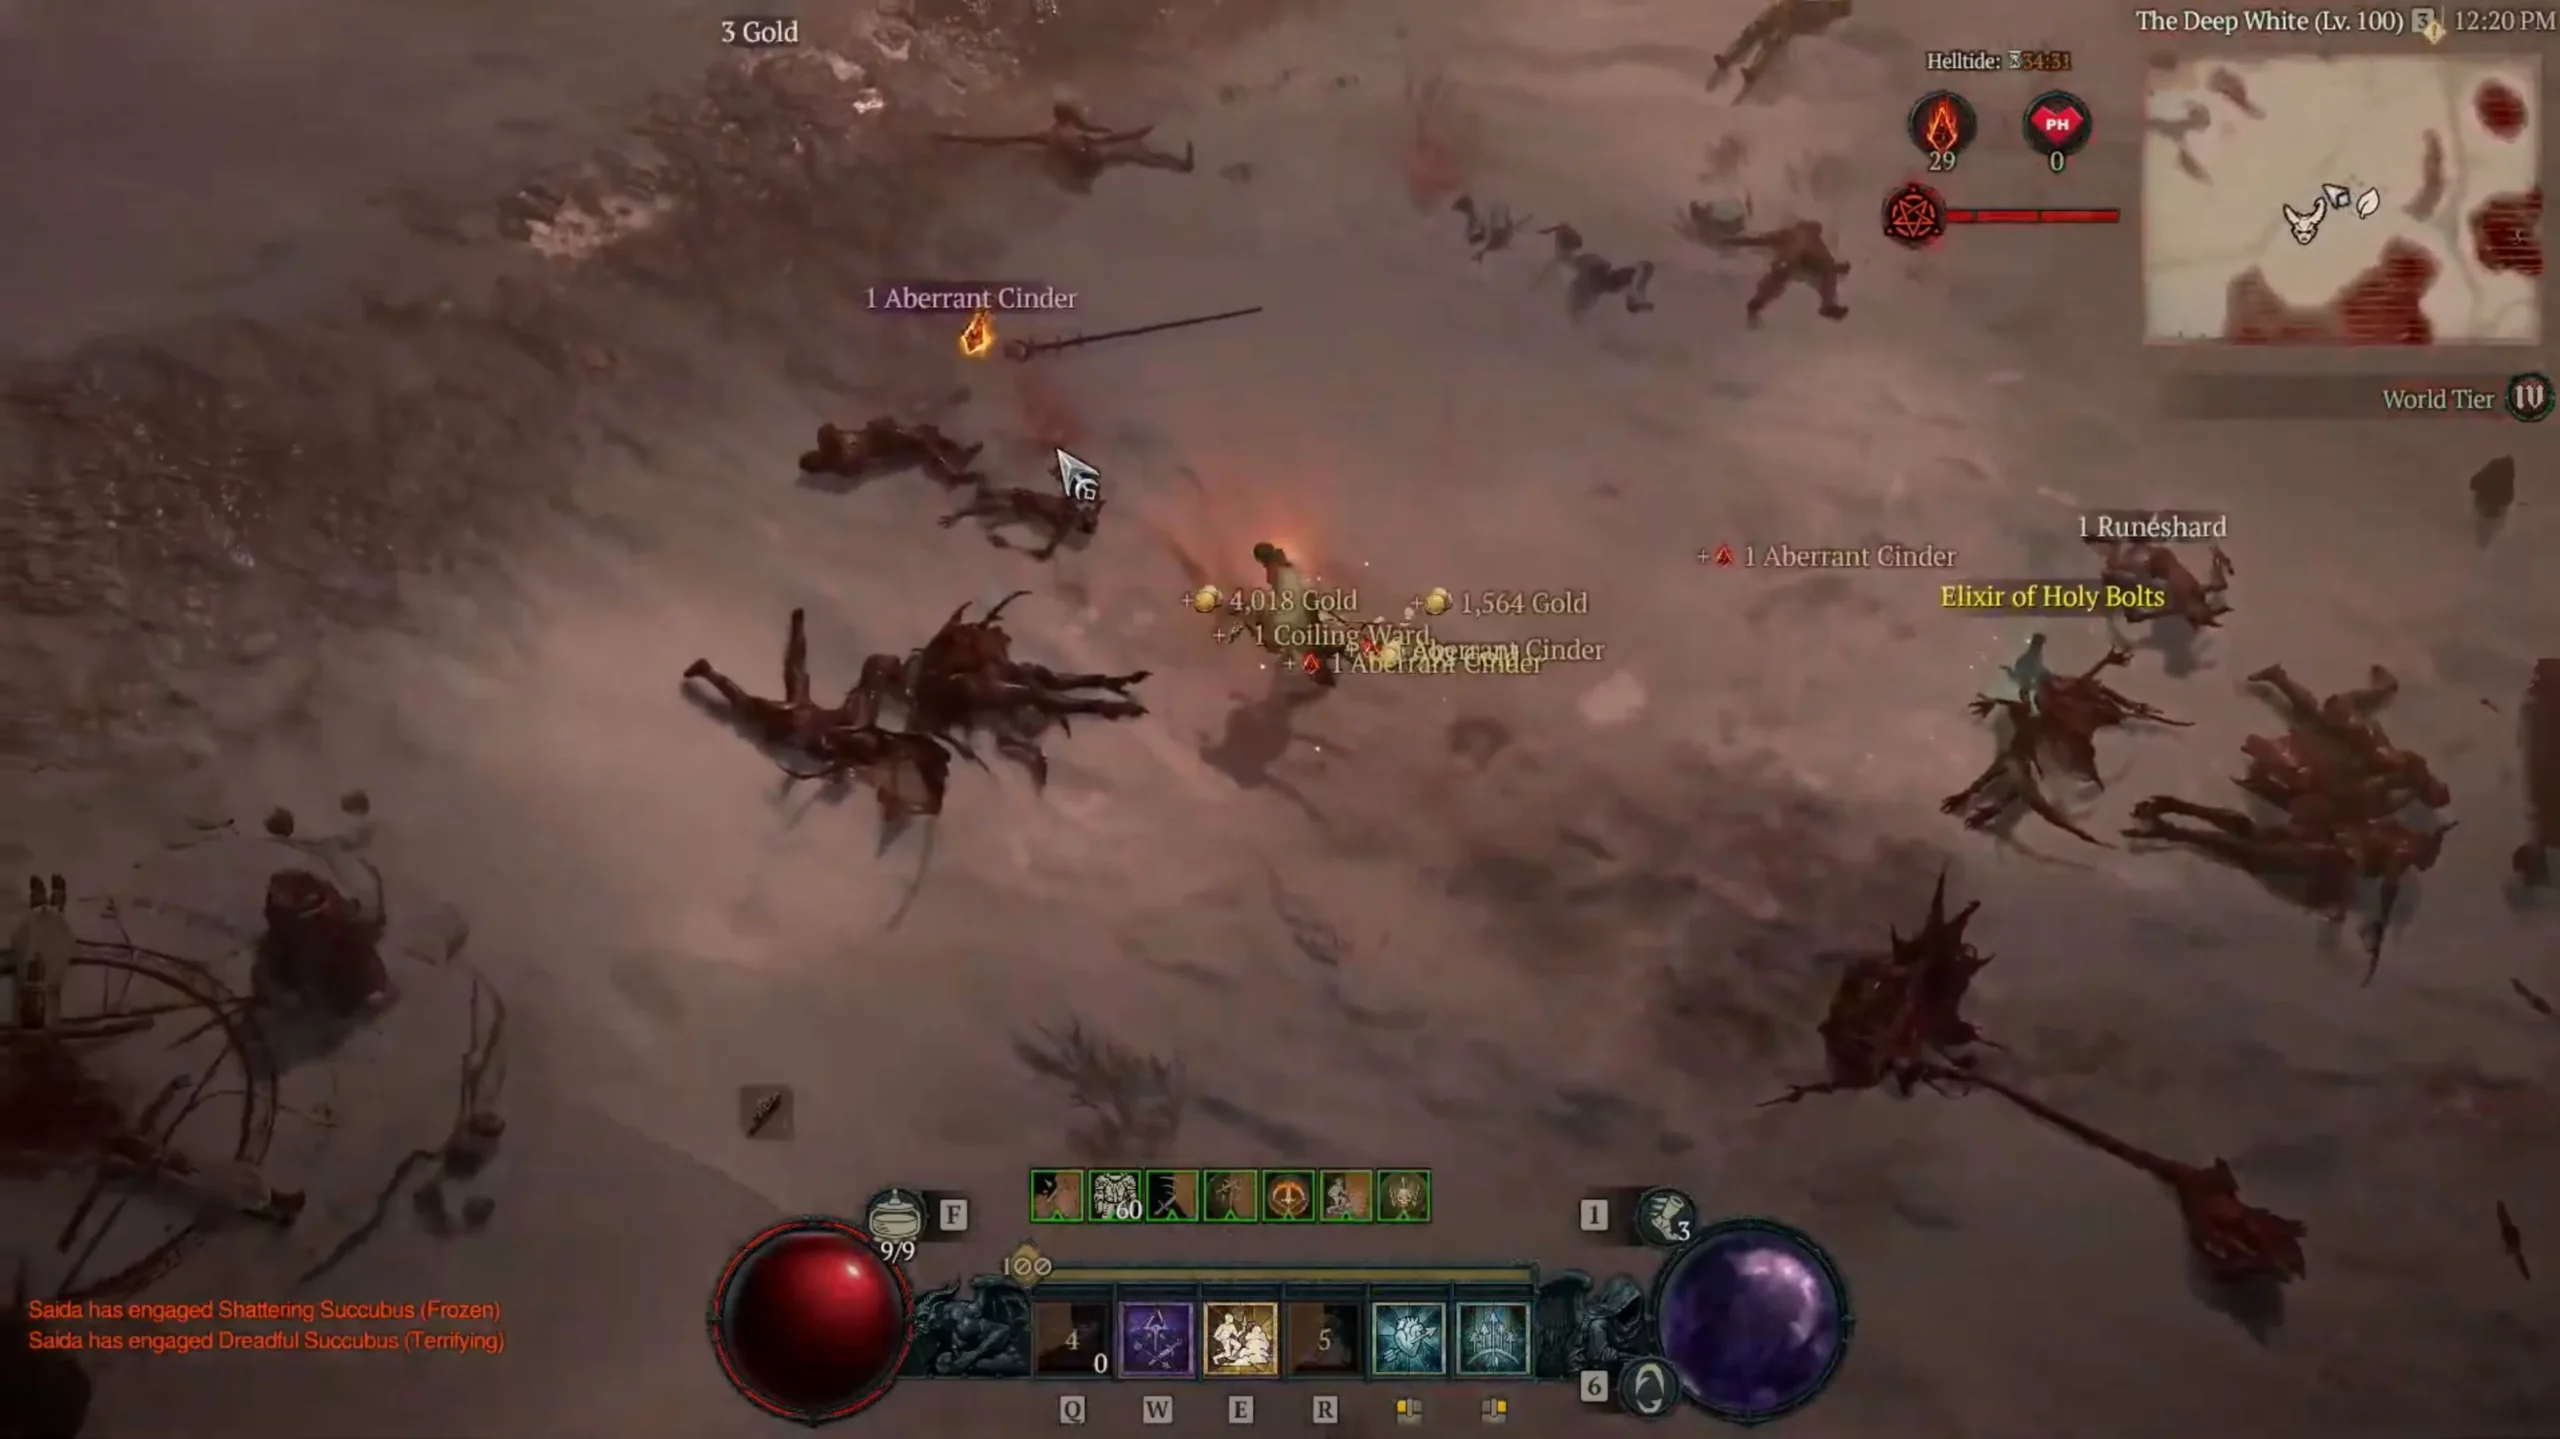 Diablo 4 Season 4, which provides players with a wider view of their surroundings during gameplay.